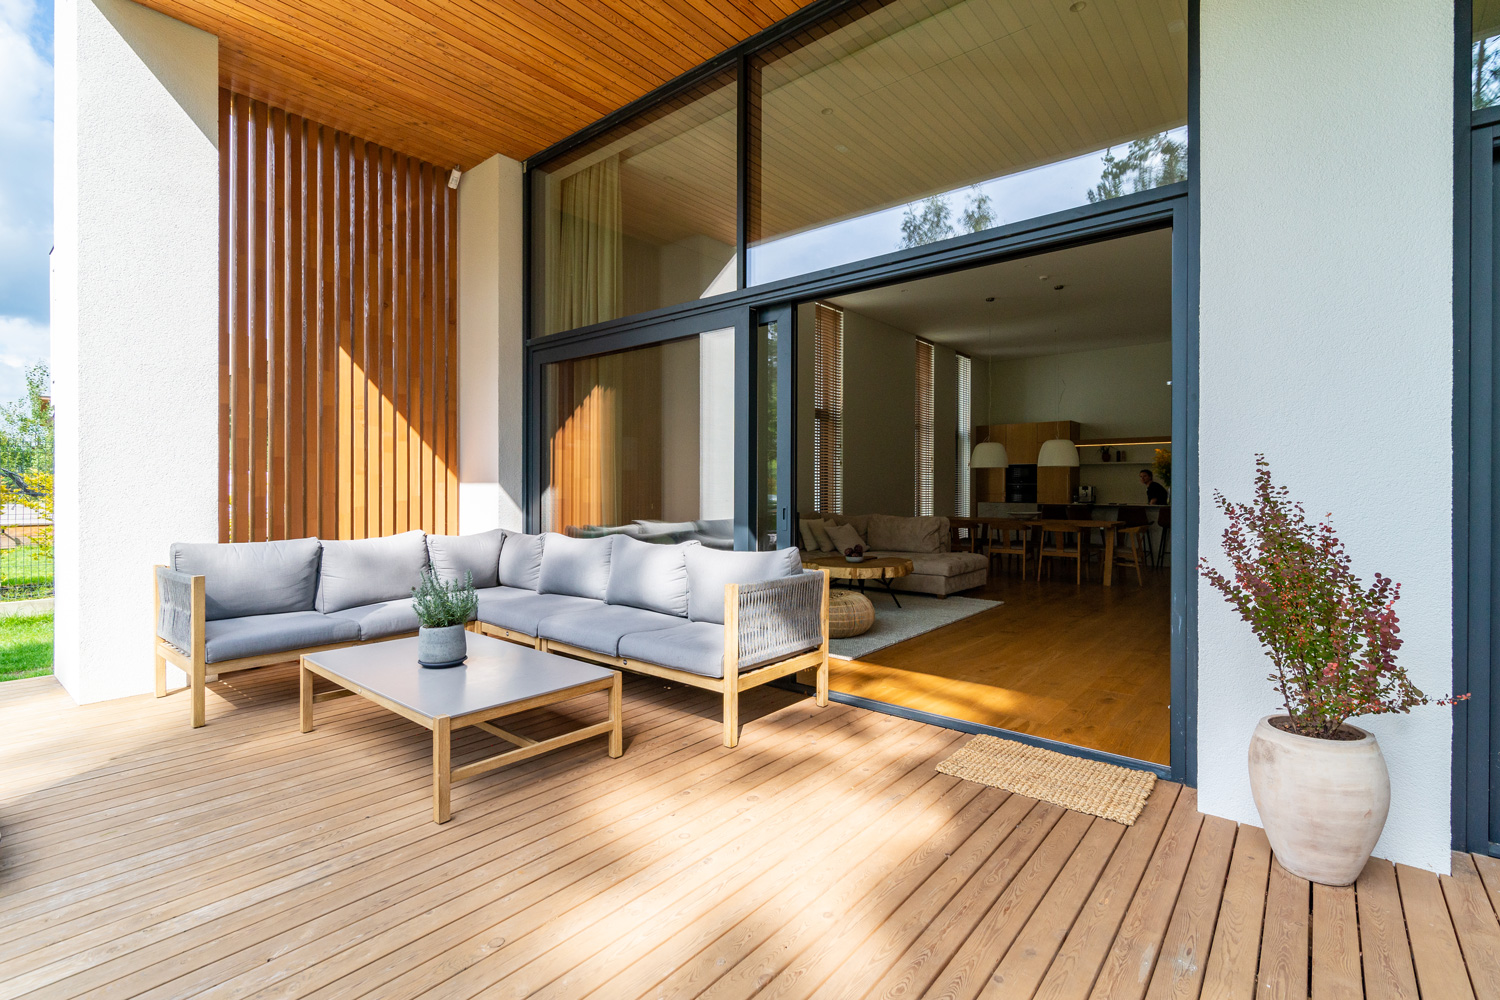 Wooden patio connected to a private building, with seating area and cozy lounge zone, open window with entrance to the house.